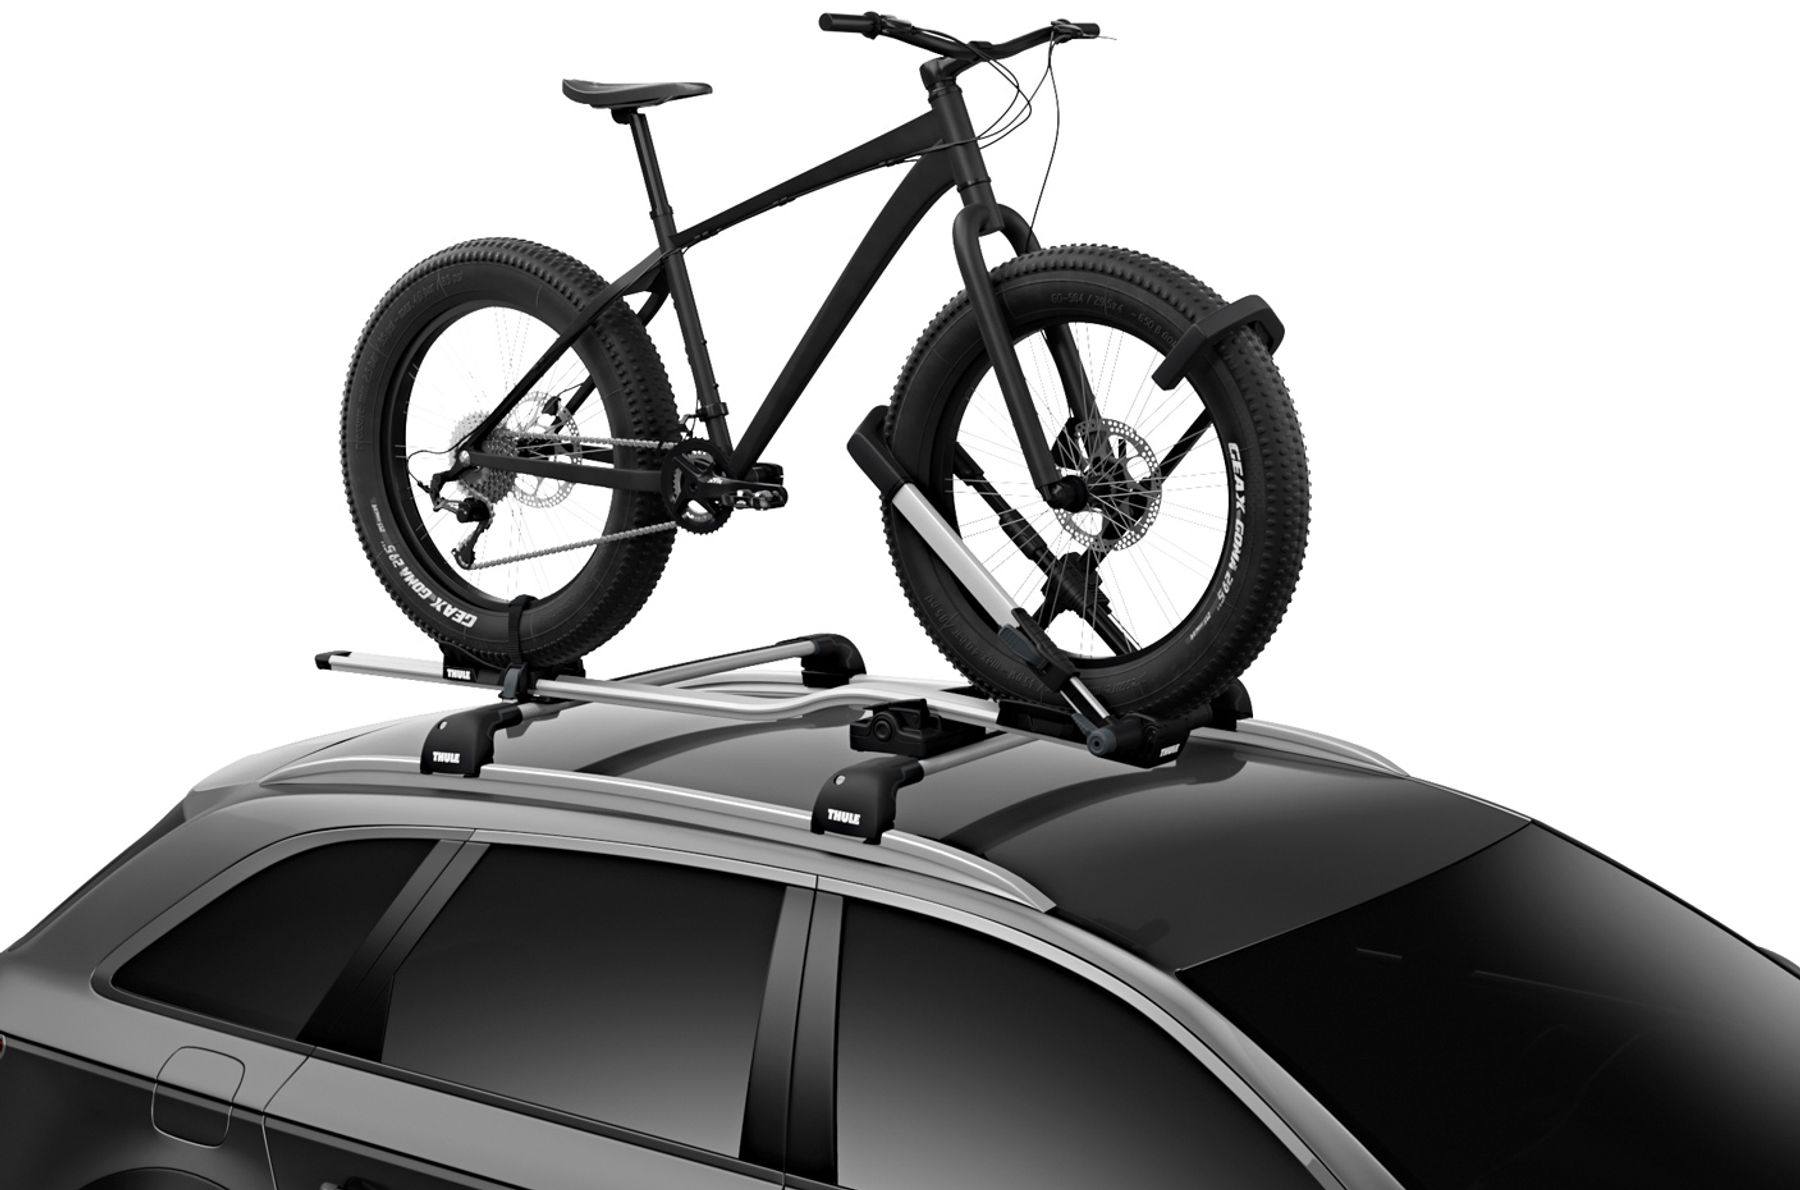 Thule 598 ProRide Roof Cycle Bike Carrier Rack 20kg Max Weight 